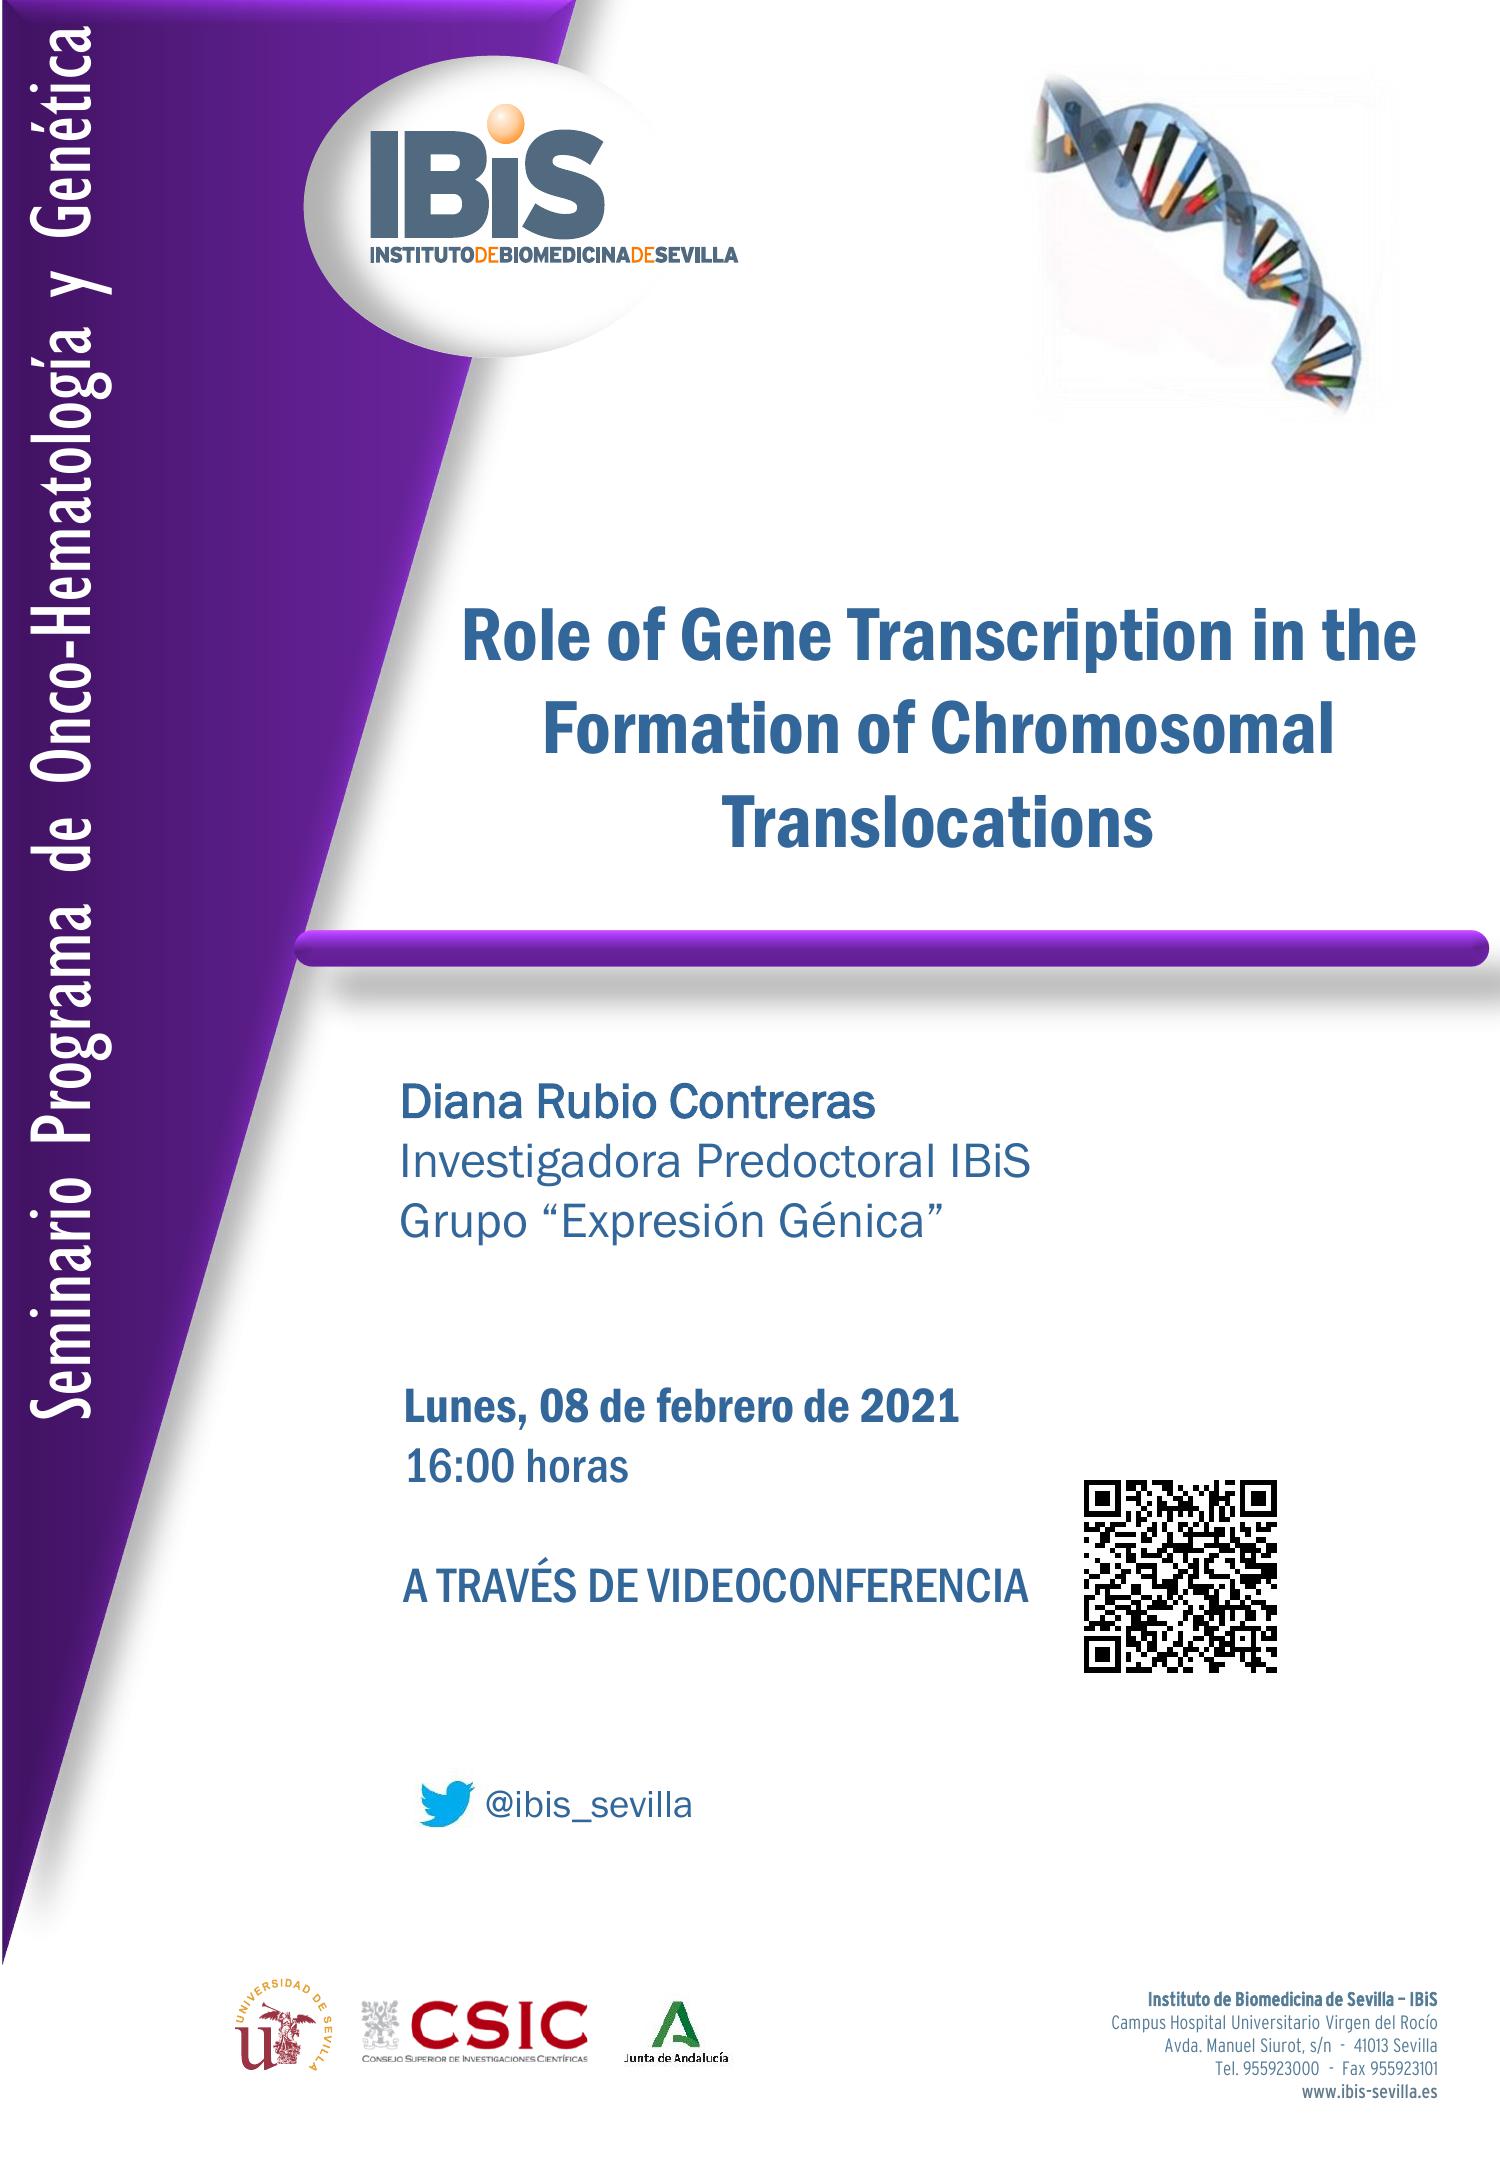 Poster: Role of Gene Transcription in the Formation of Chromosomal Translocations